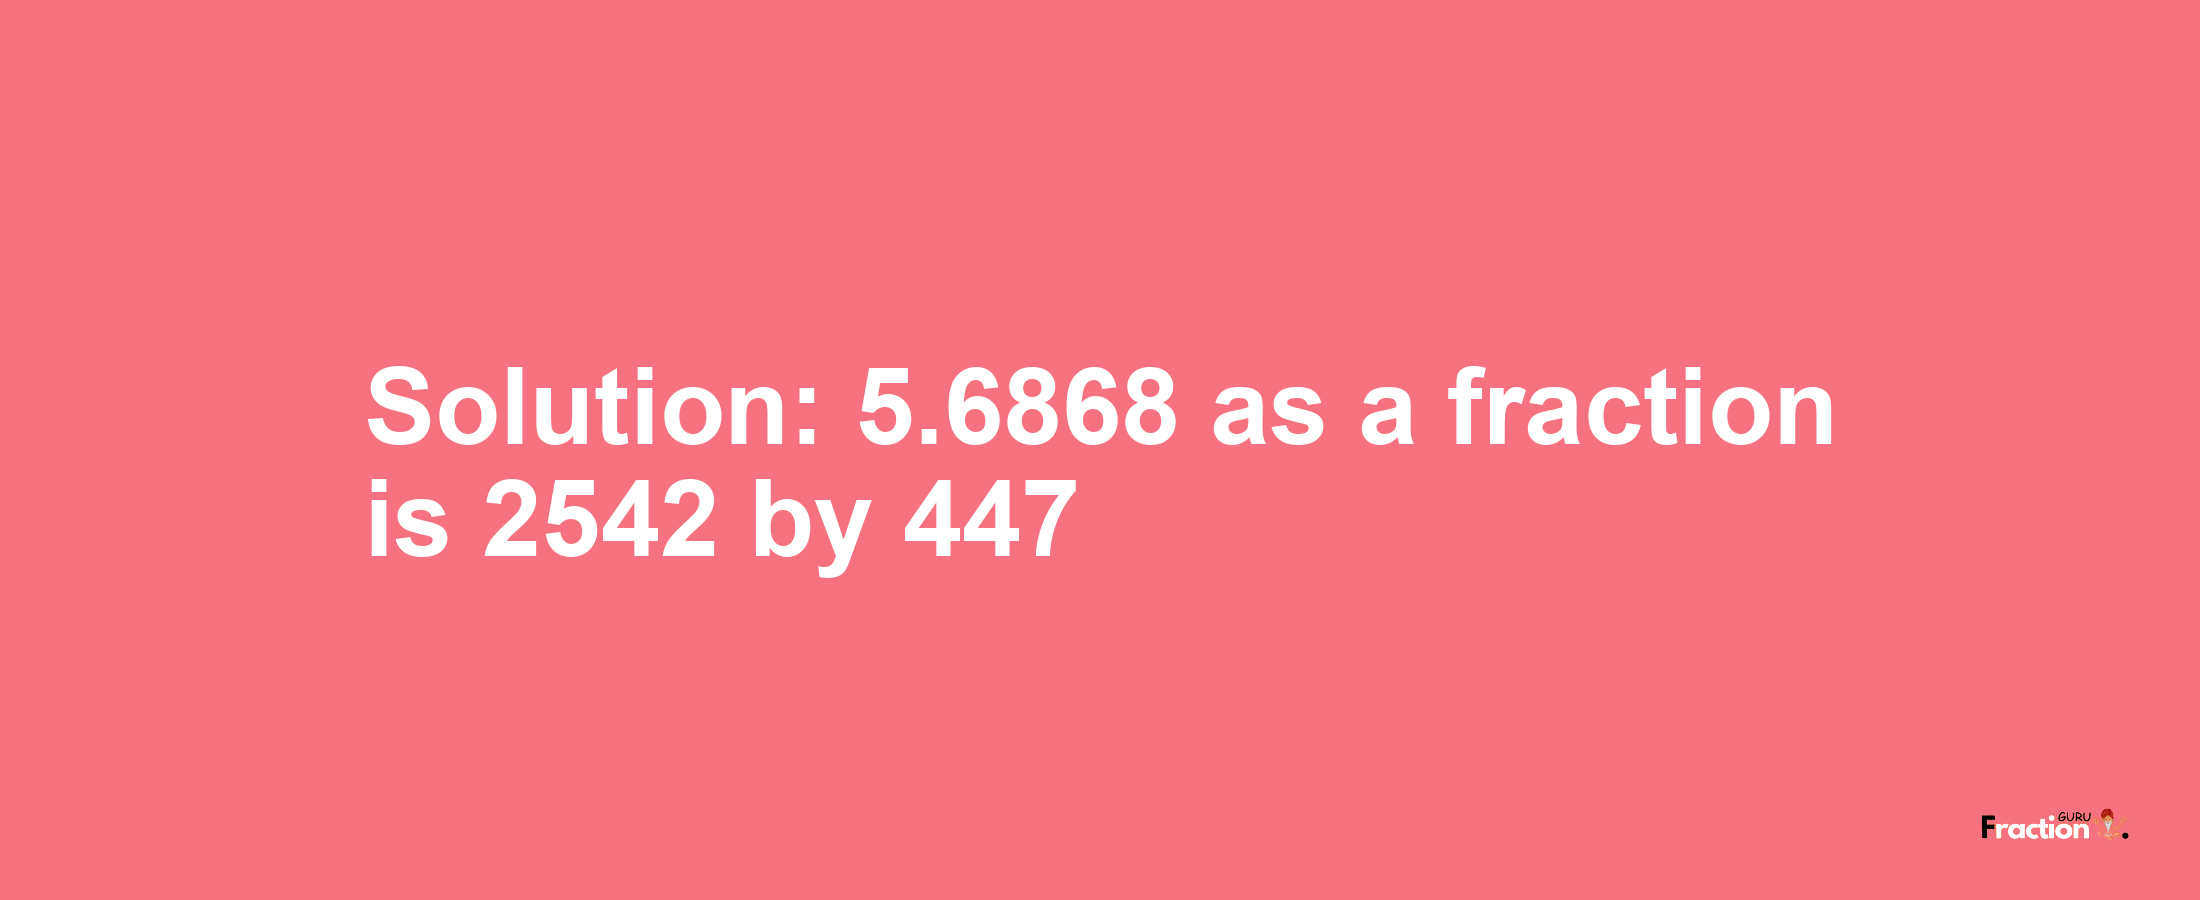 Solution:5.6868 as a fraction is 2542/447